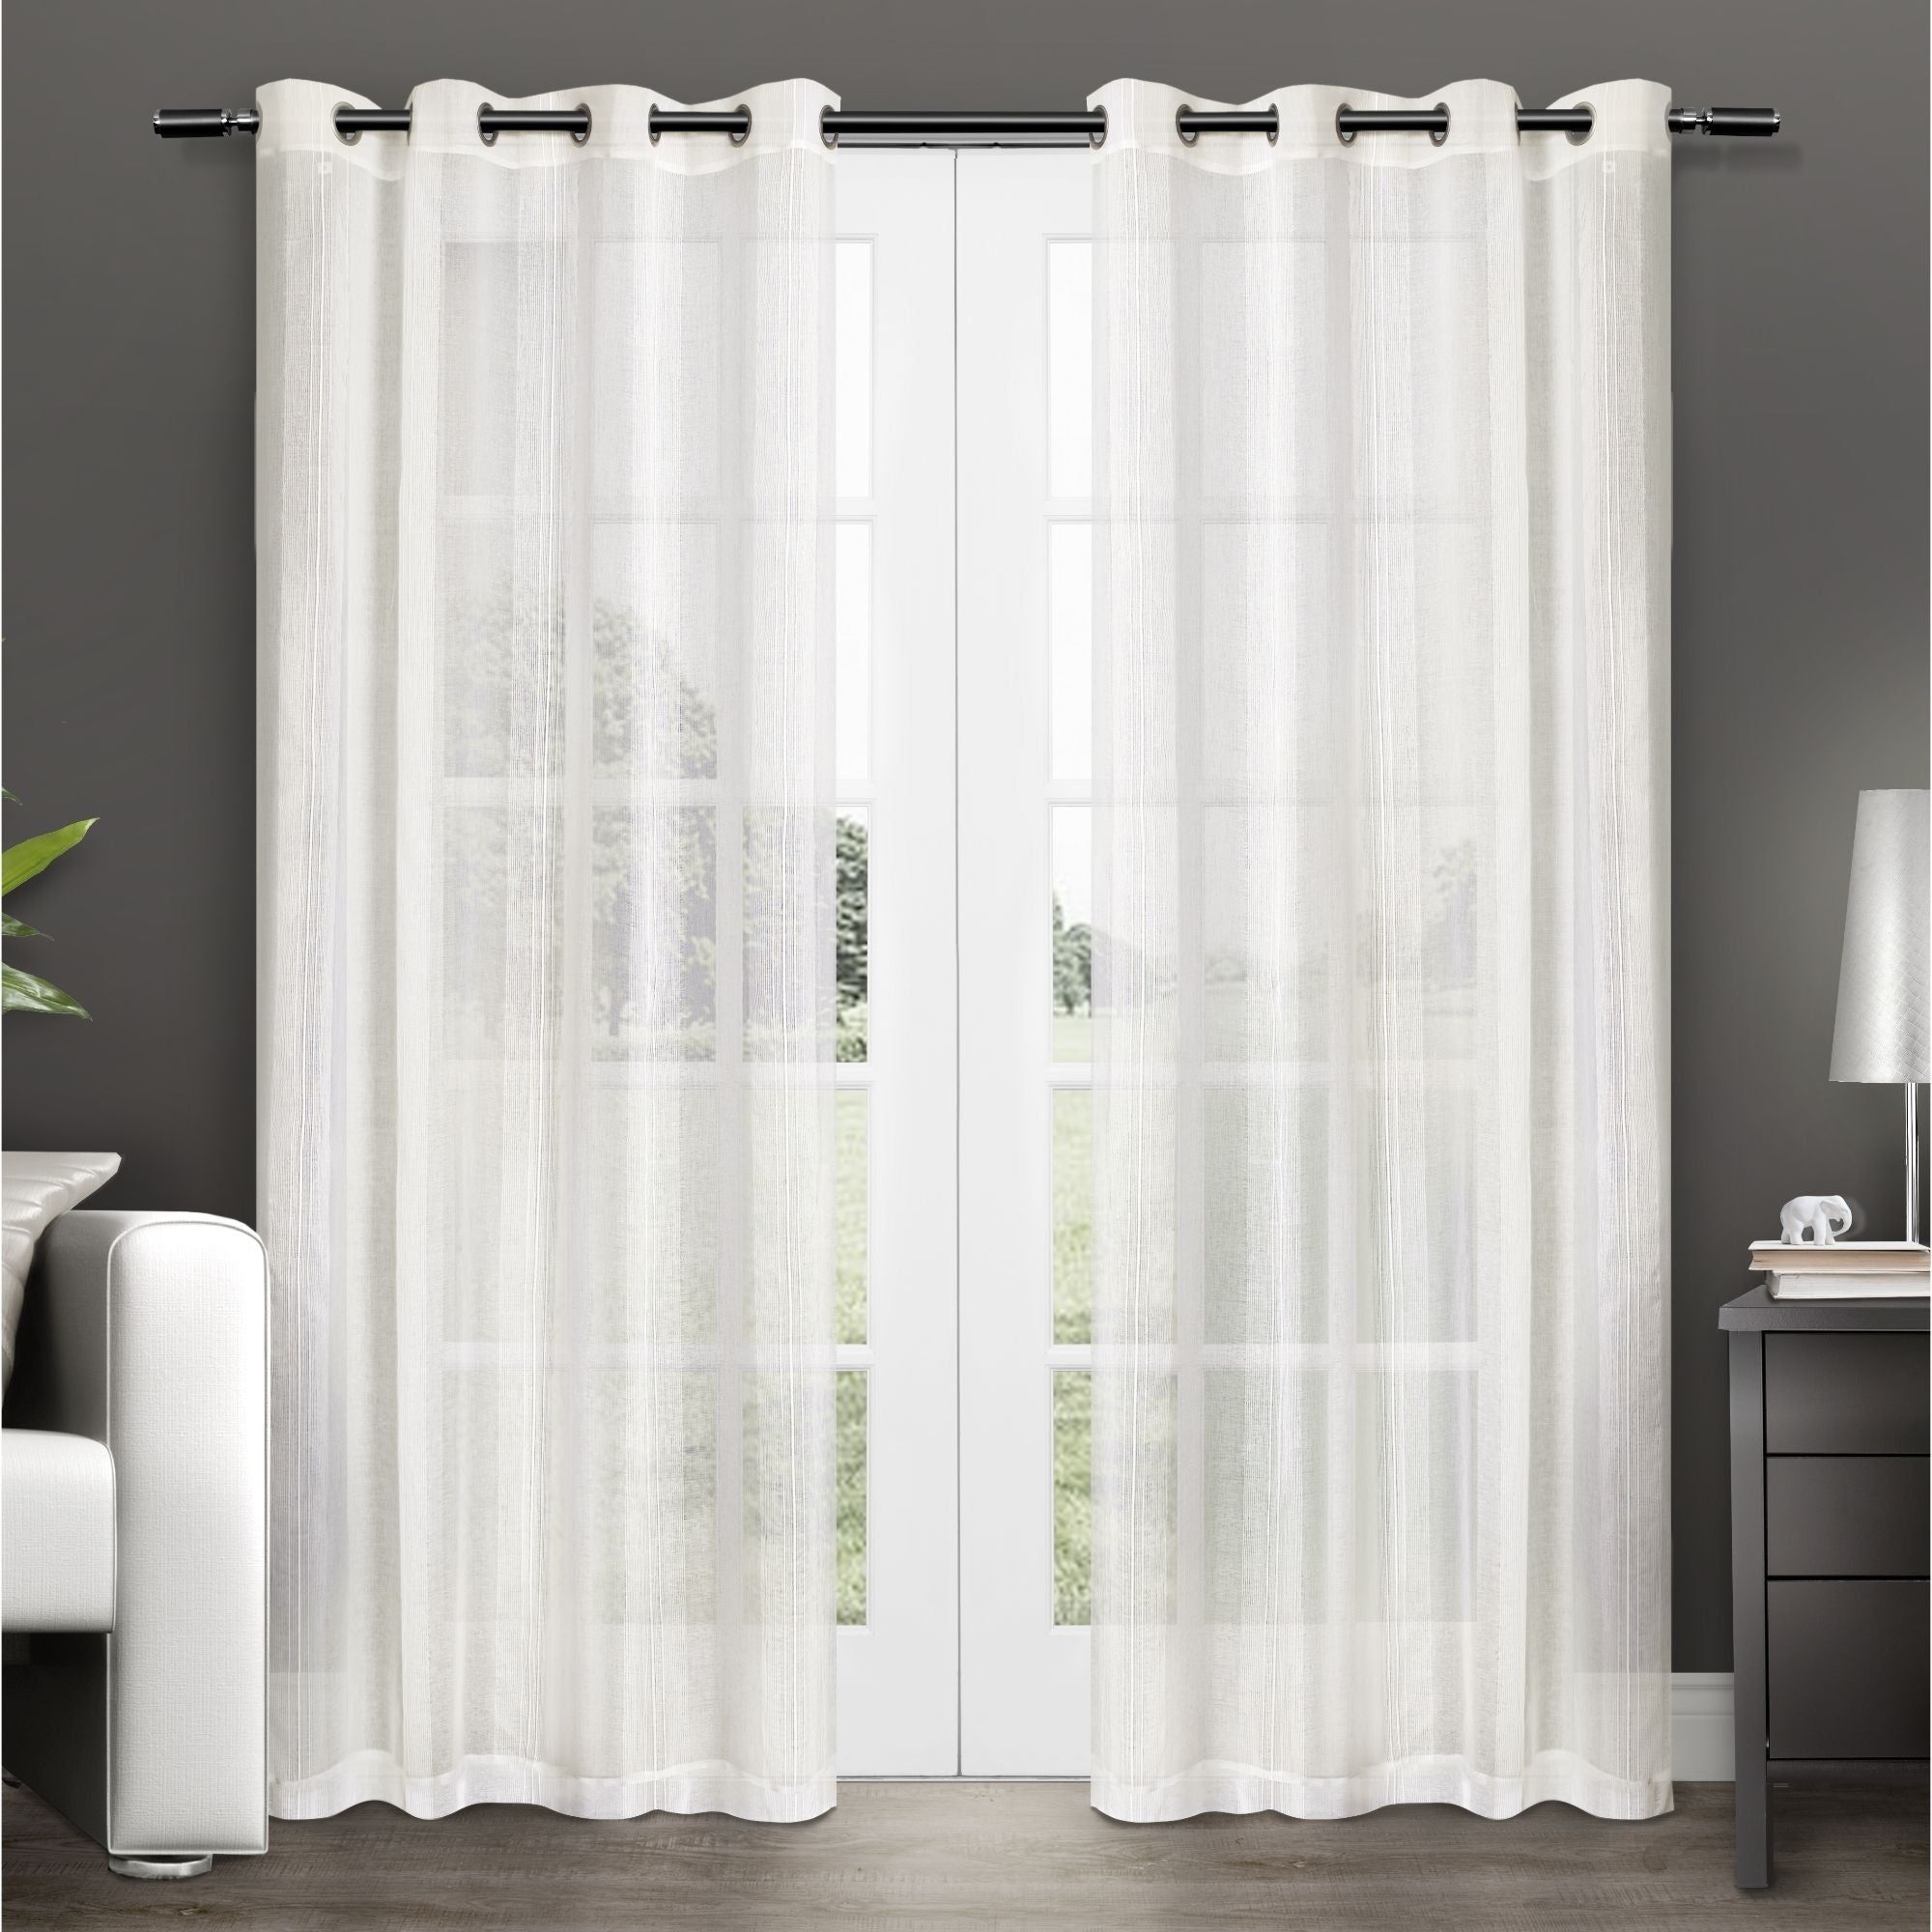 Ati Home Penny Sheer Grommet Top Curtain Panel Pair In Penny Sheer Grommet Top Curtain Panel Pairs (View 1 of 20)